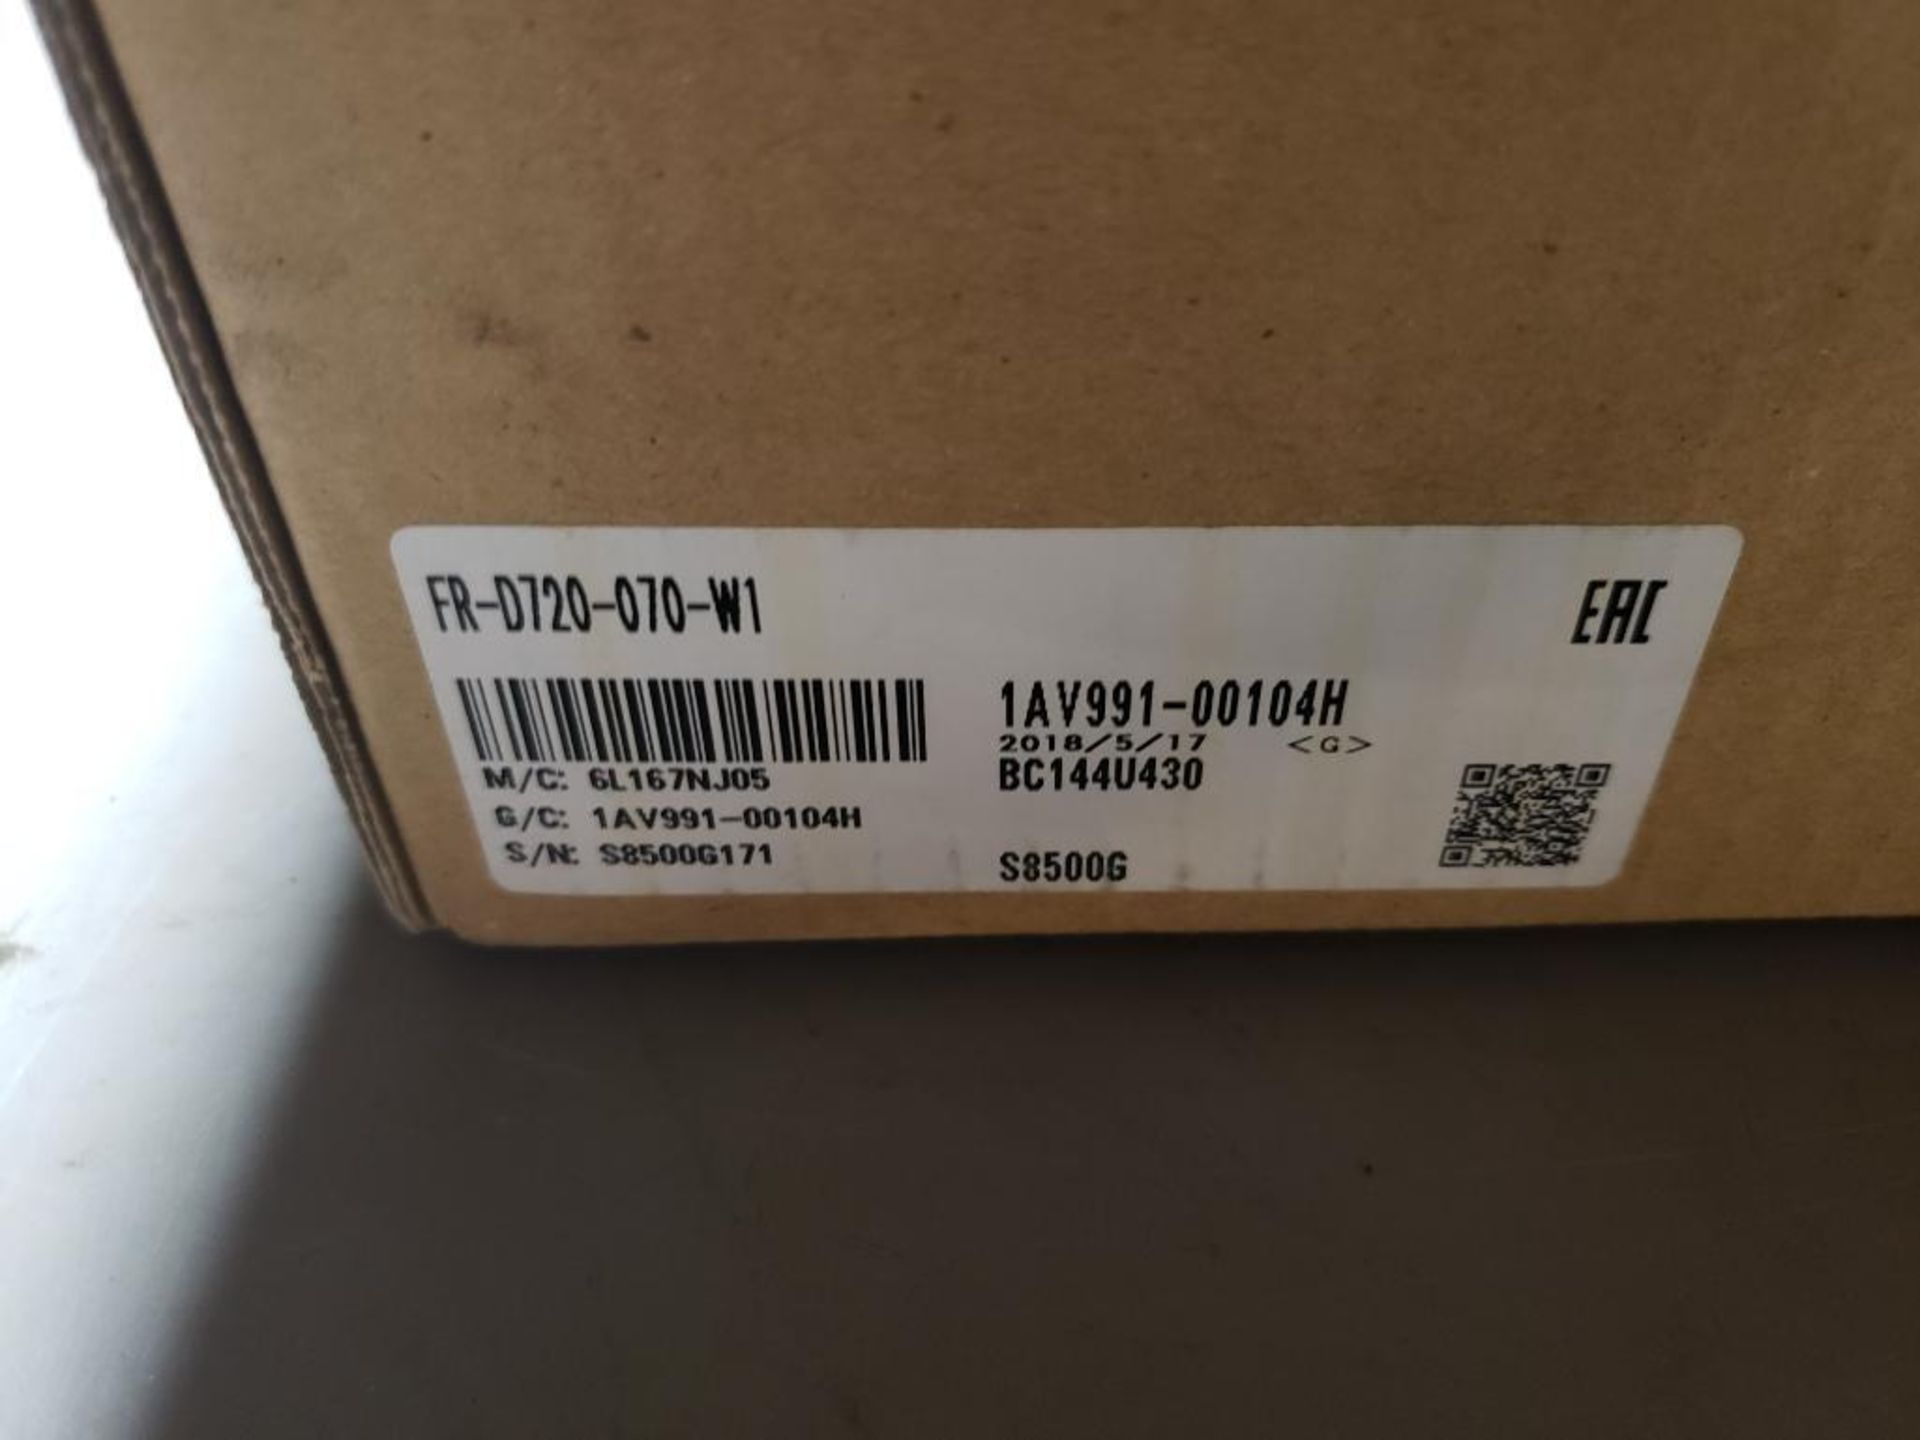 Mitsubishi inverter drive. Part number FR-D720-070-W1. New in box. - Image 3 of 4